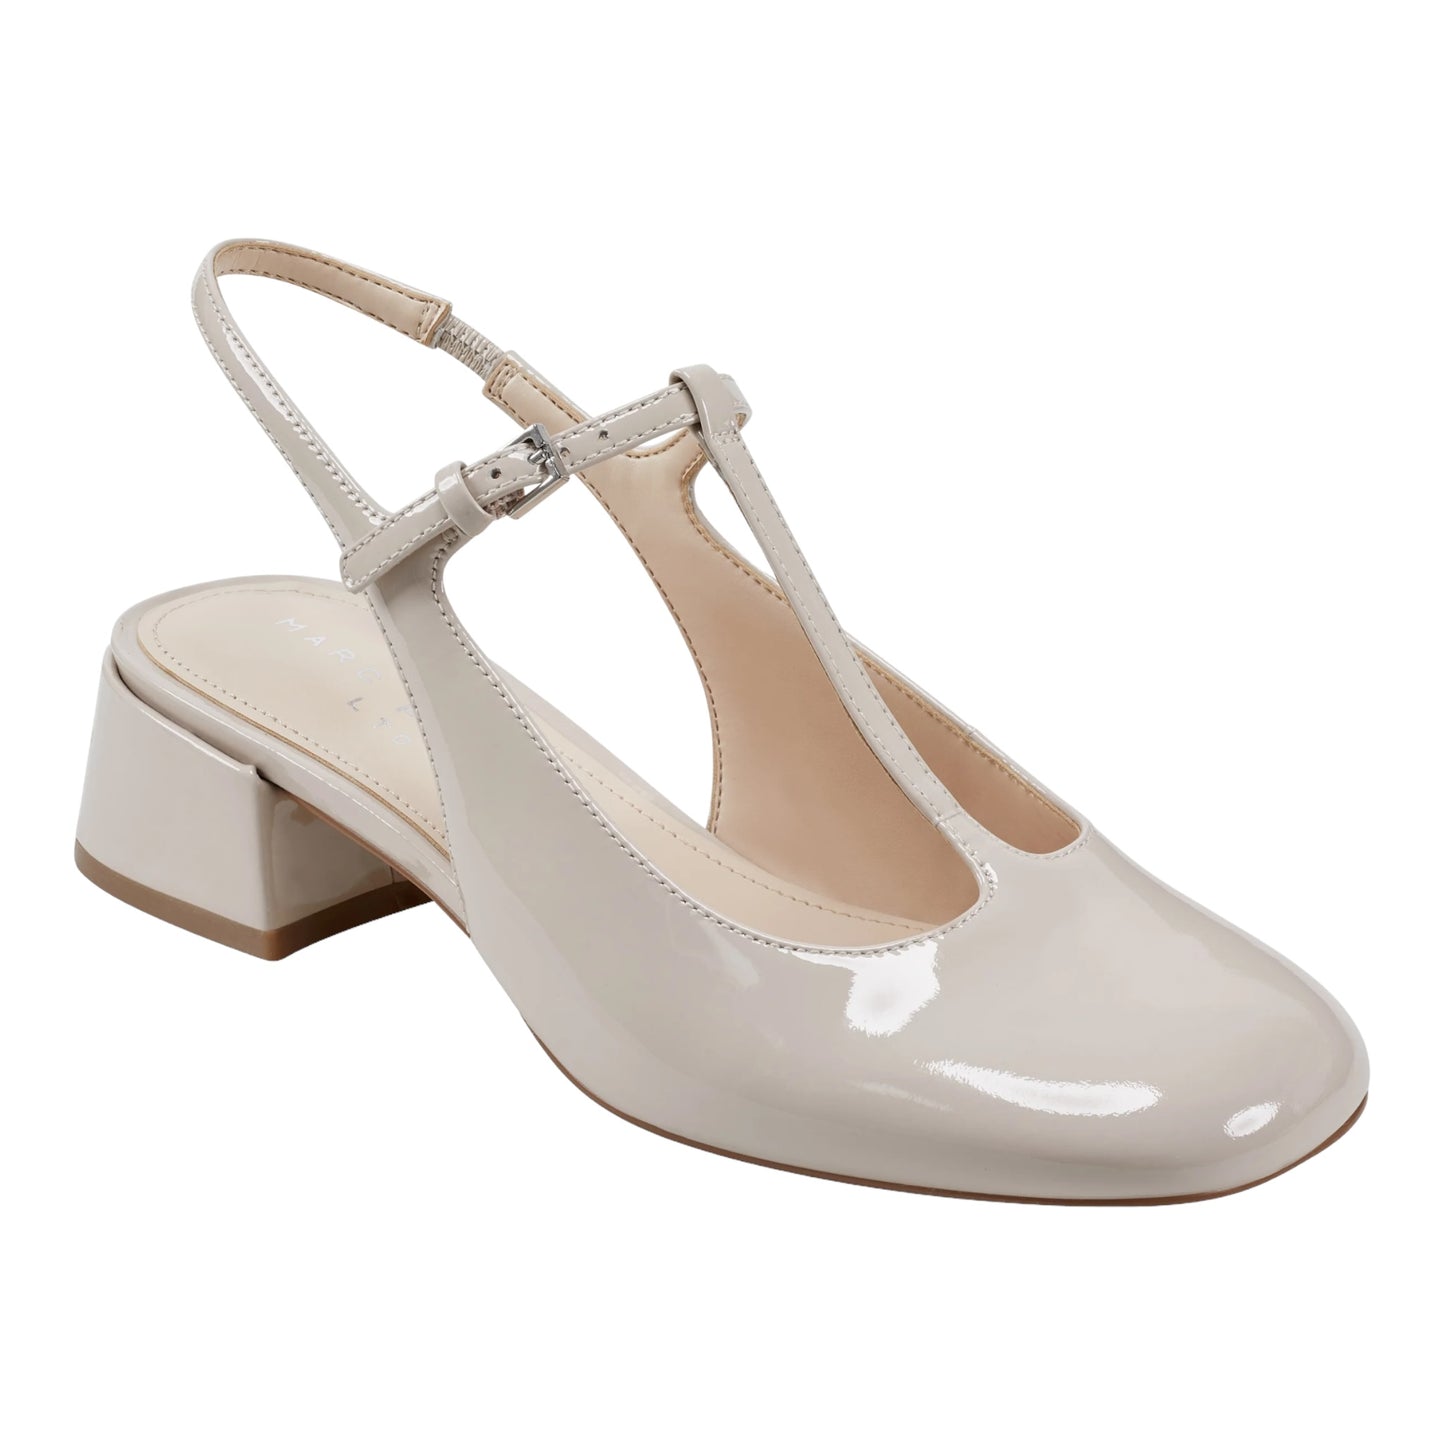 MARC FISHER | DOLLY | NATURAL PATENT LEATHER